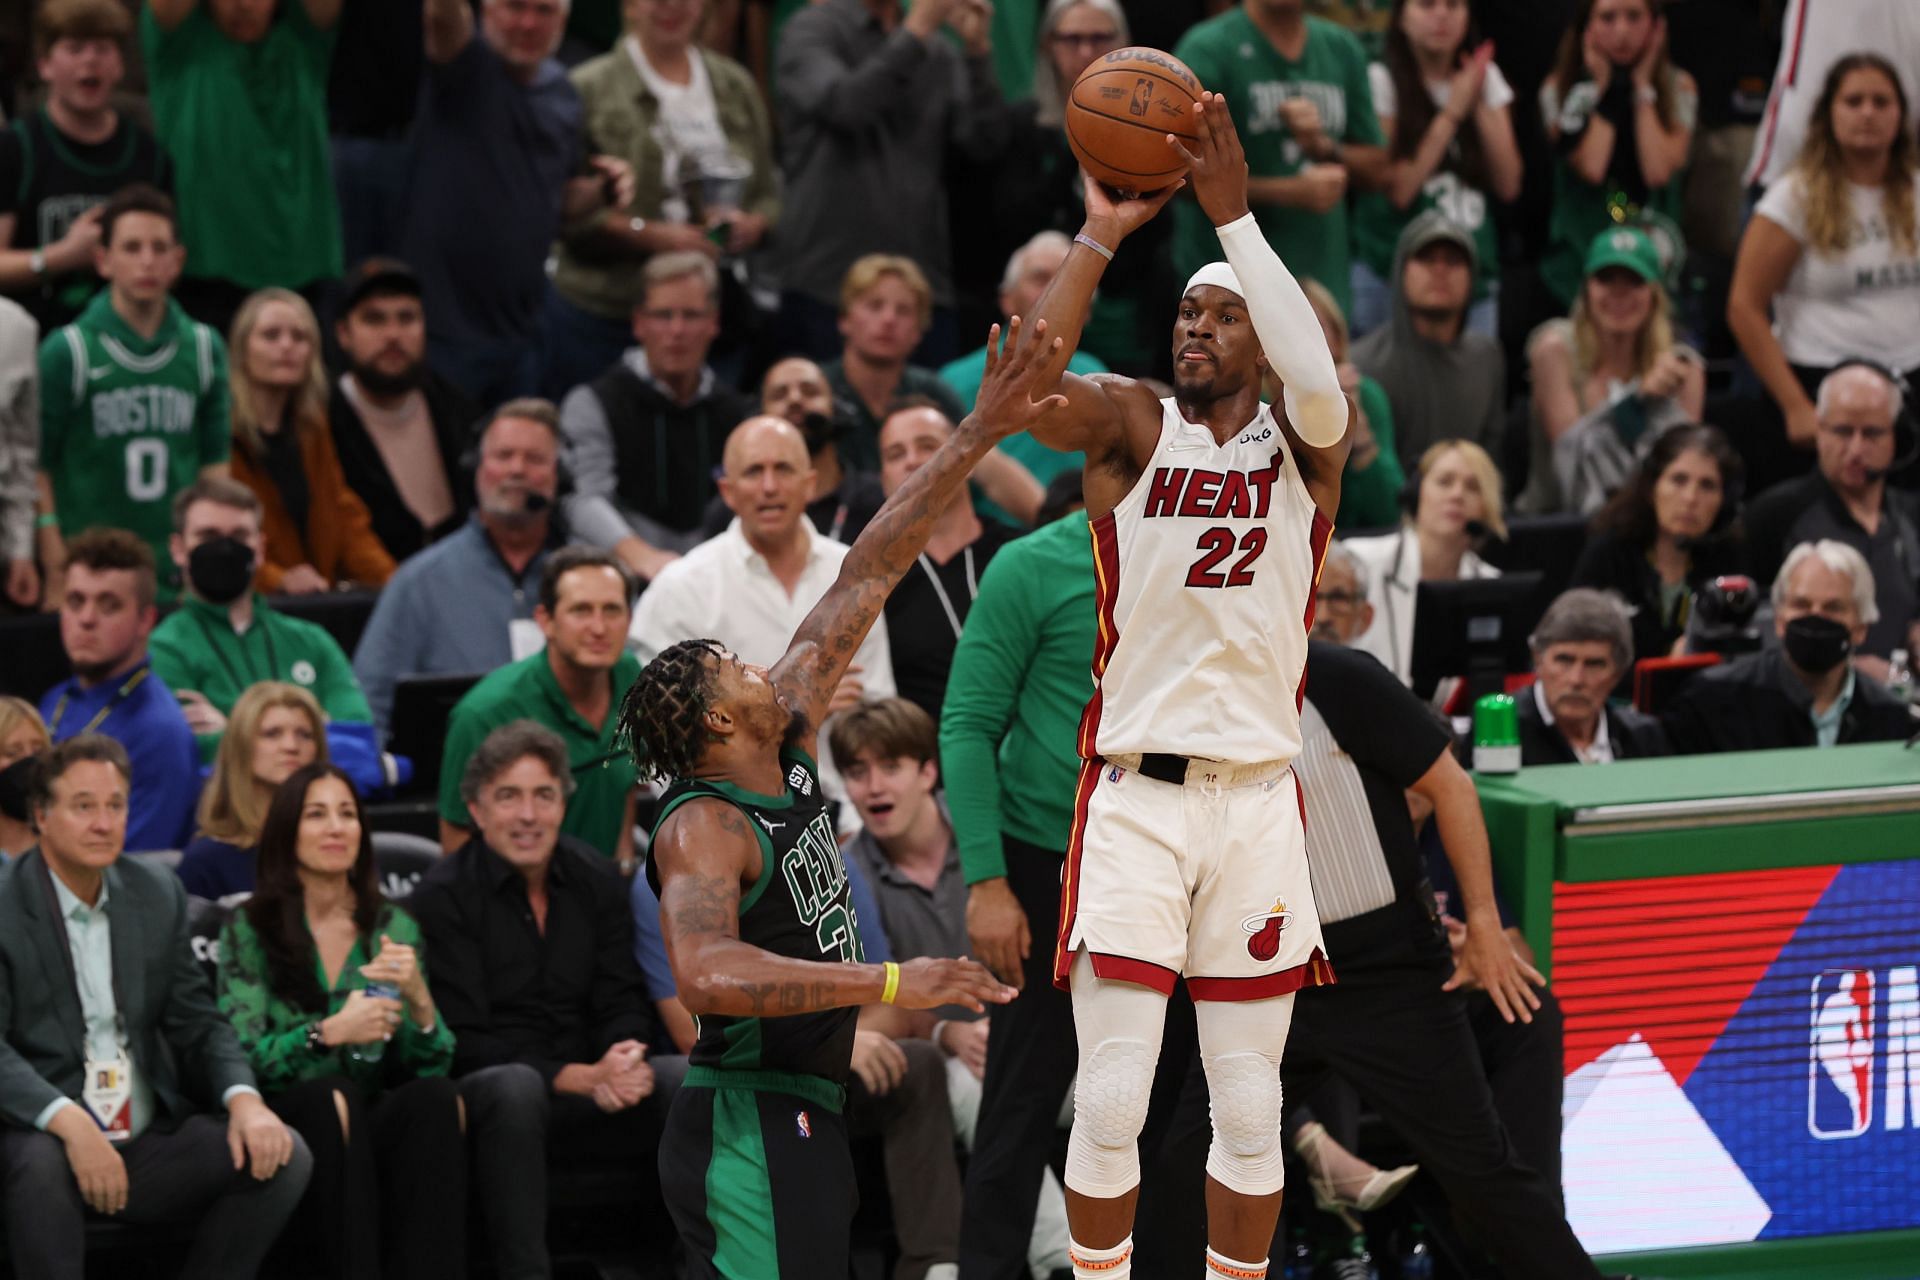 Jimmy Butler&#039;s late missed three stopped the Miami Heat rally cold and allowed the Boston Celtics to hold on for the win.